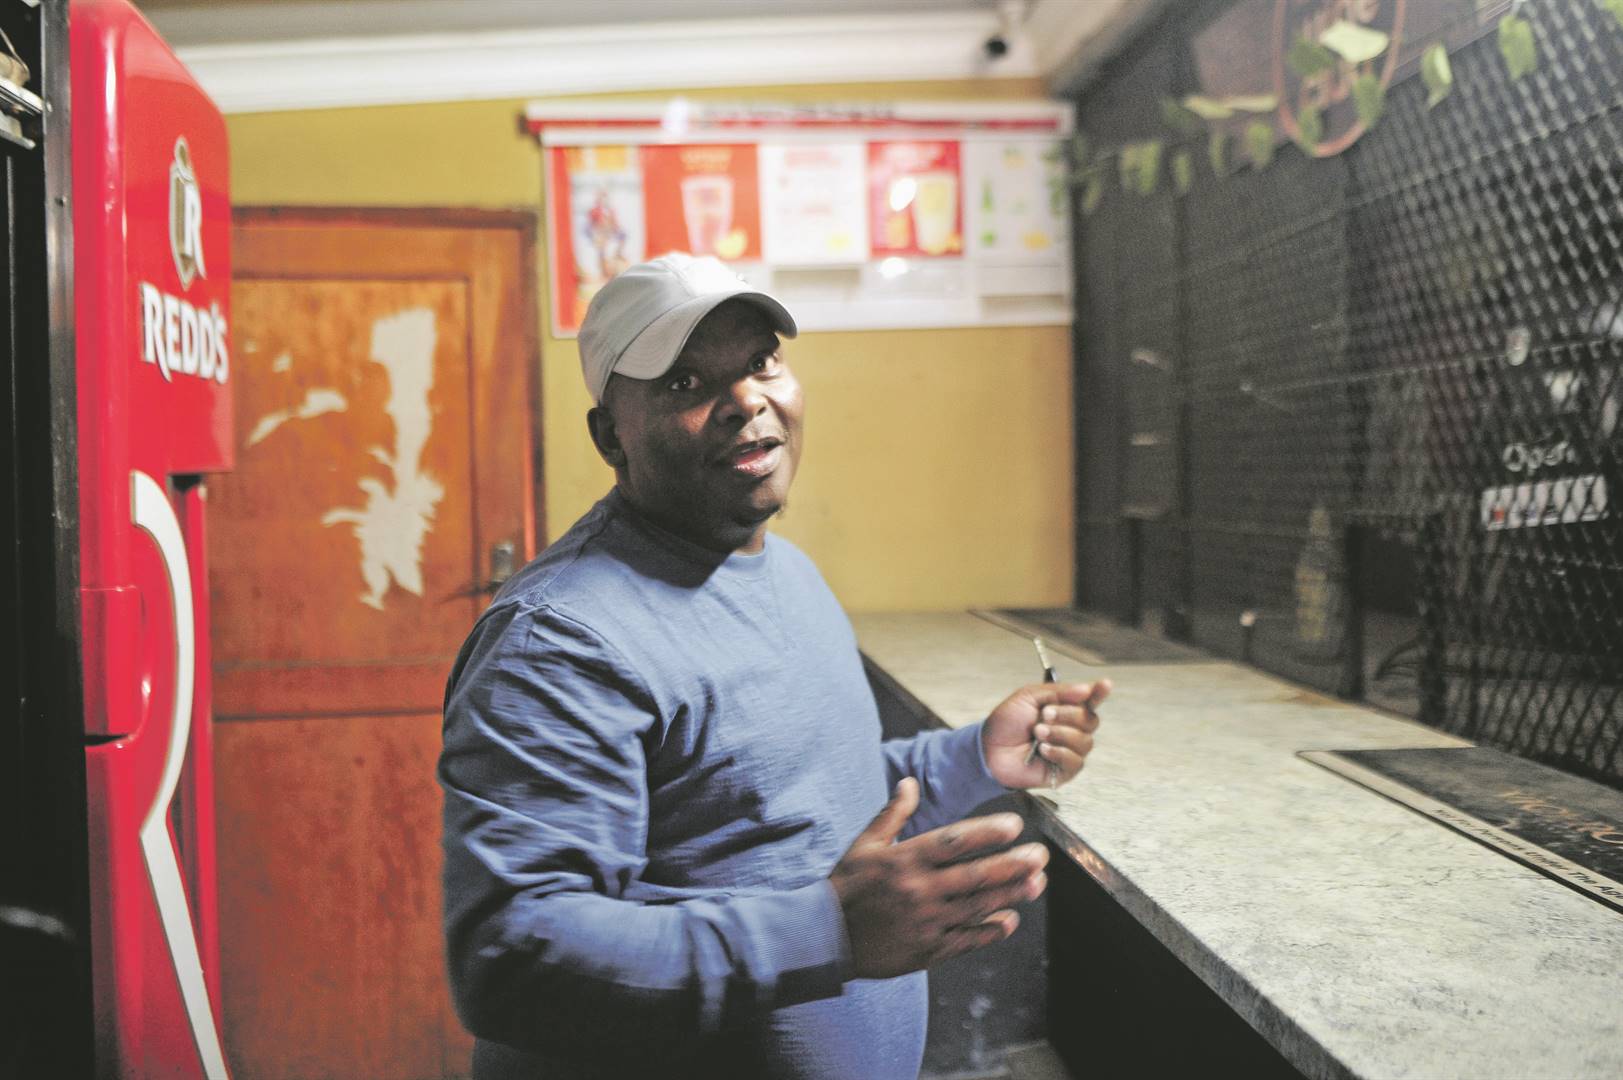 Enyobeni Tavern owner Siyakhangela Ndevu has been found guilty for selling alcohol to minors